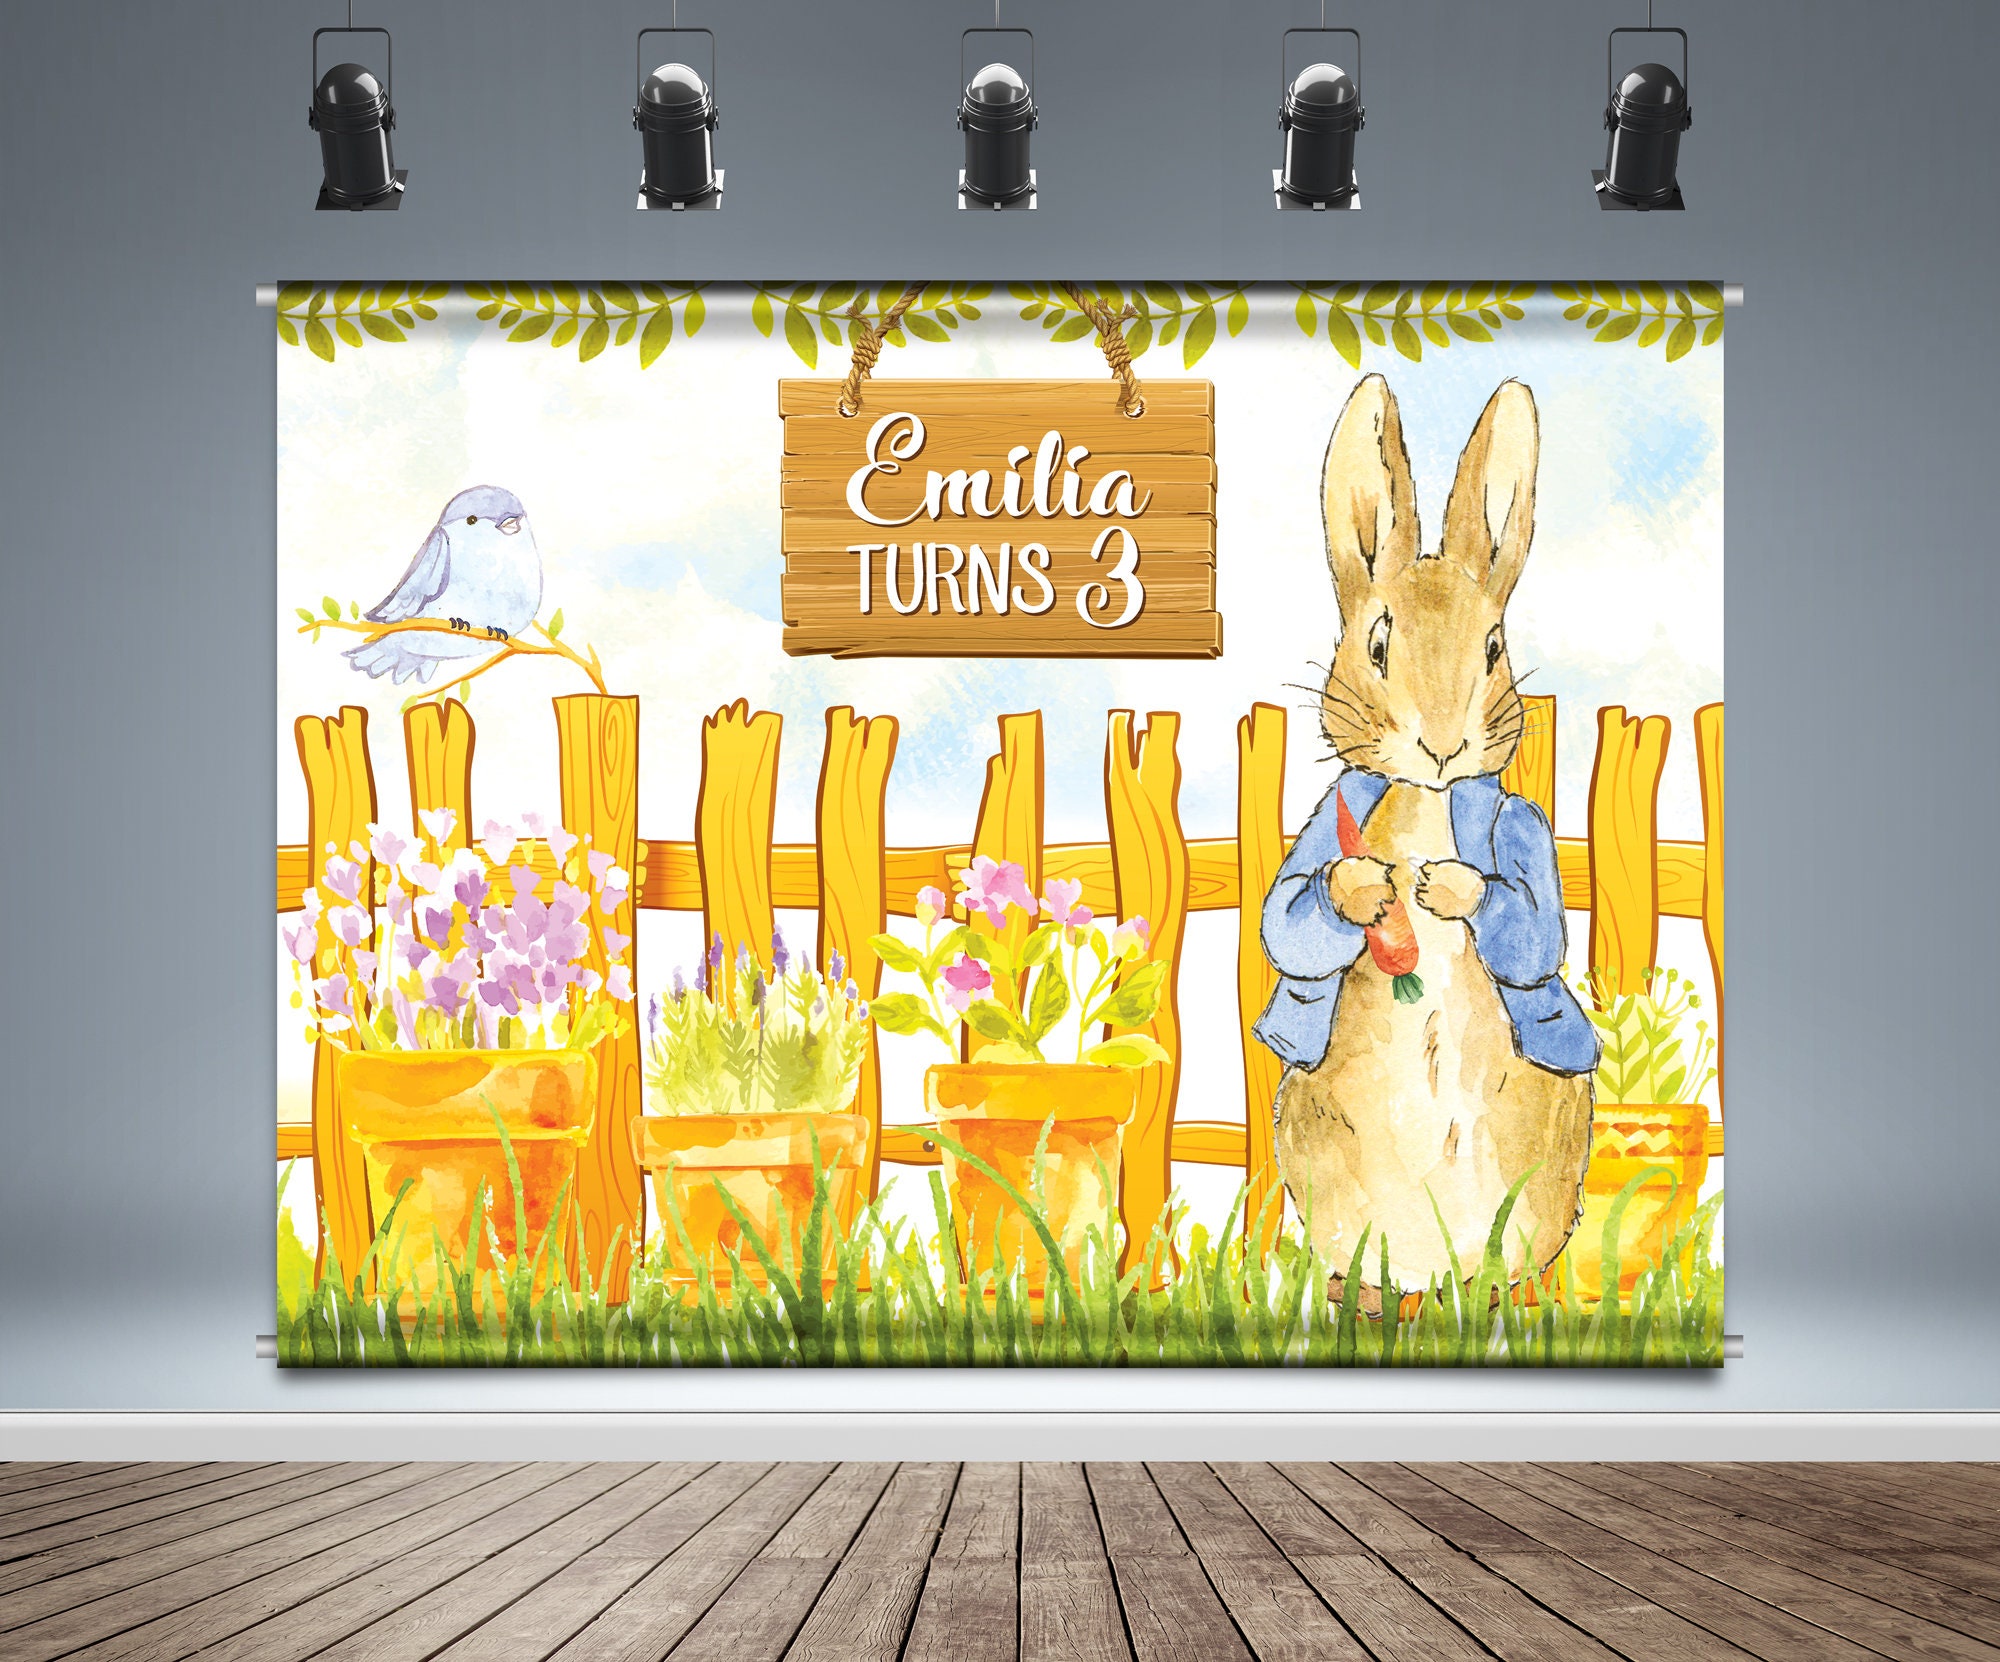  Peter Rabbit Backdrop for Baby Shower Weclome Baby Peter  Rabbit Baby Shower Banner for Boy Vinyl Background Peter Rabbit 1st  Birthday Party Decorations (5X3FT) : Electronics